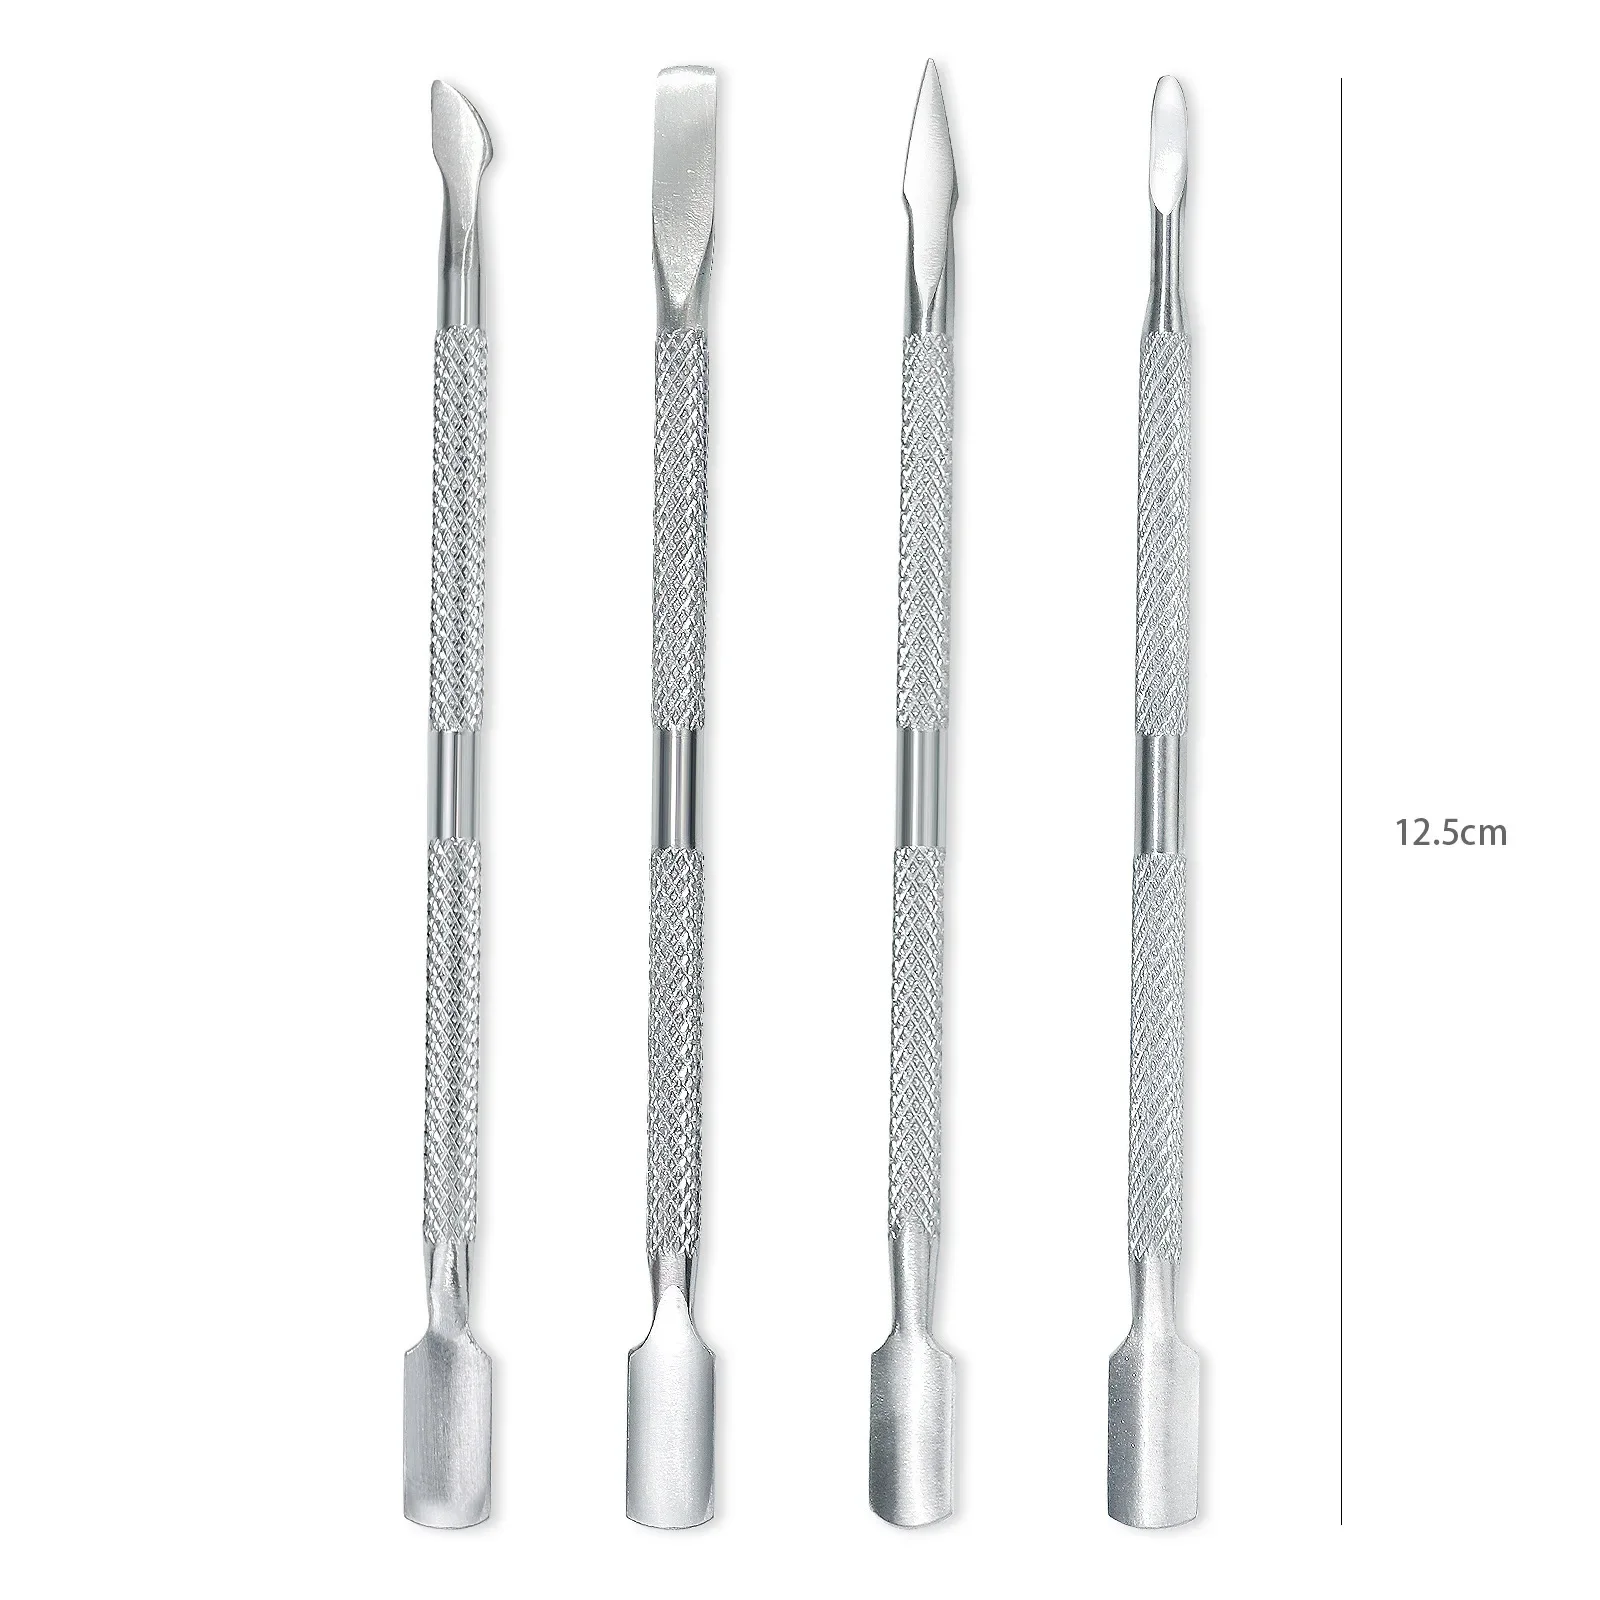 4pcs/Lot Stainless Steel Cuticle Remover Double Sided Finger Dead Skin Push Nail Cuticle Pusher Manicure Nail Care Tool